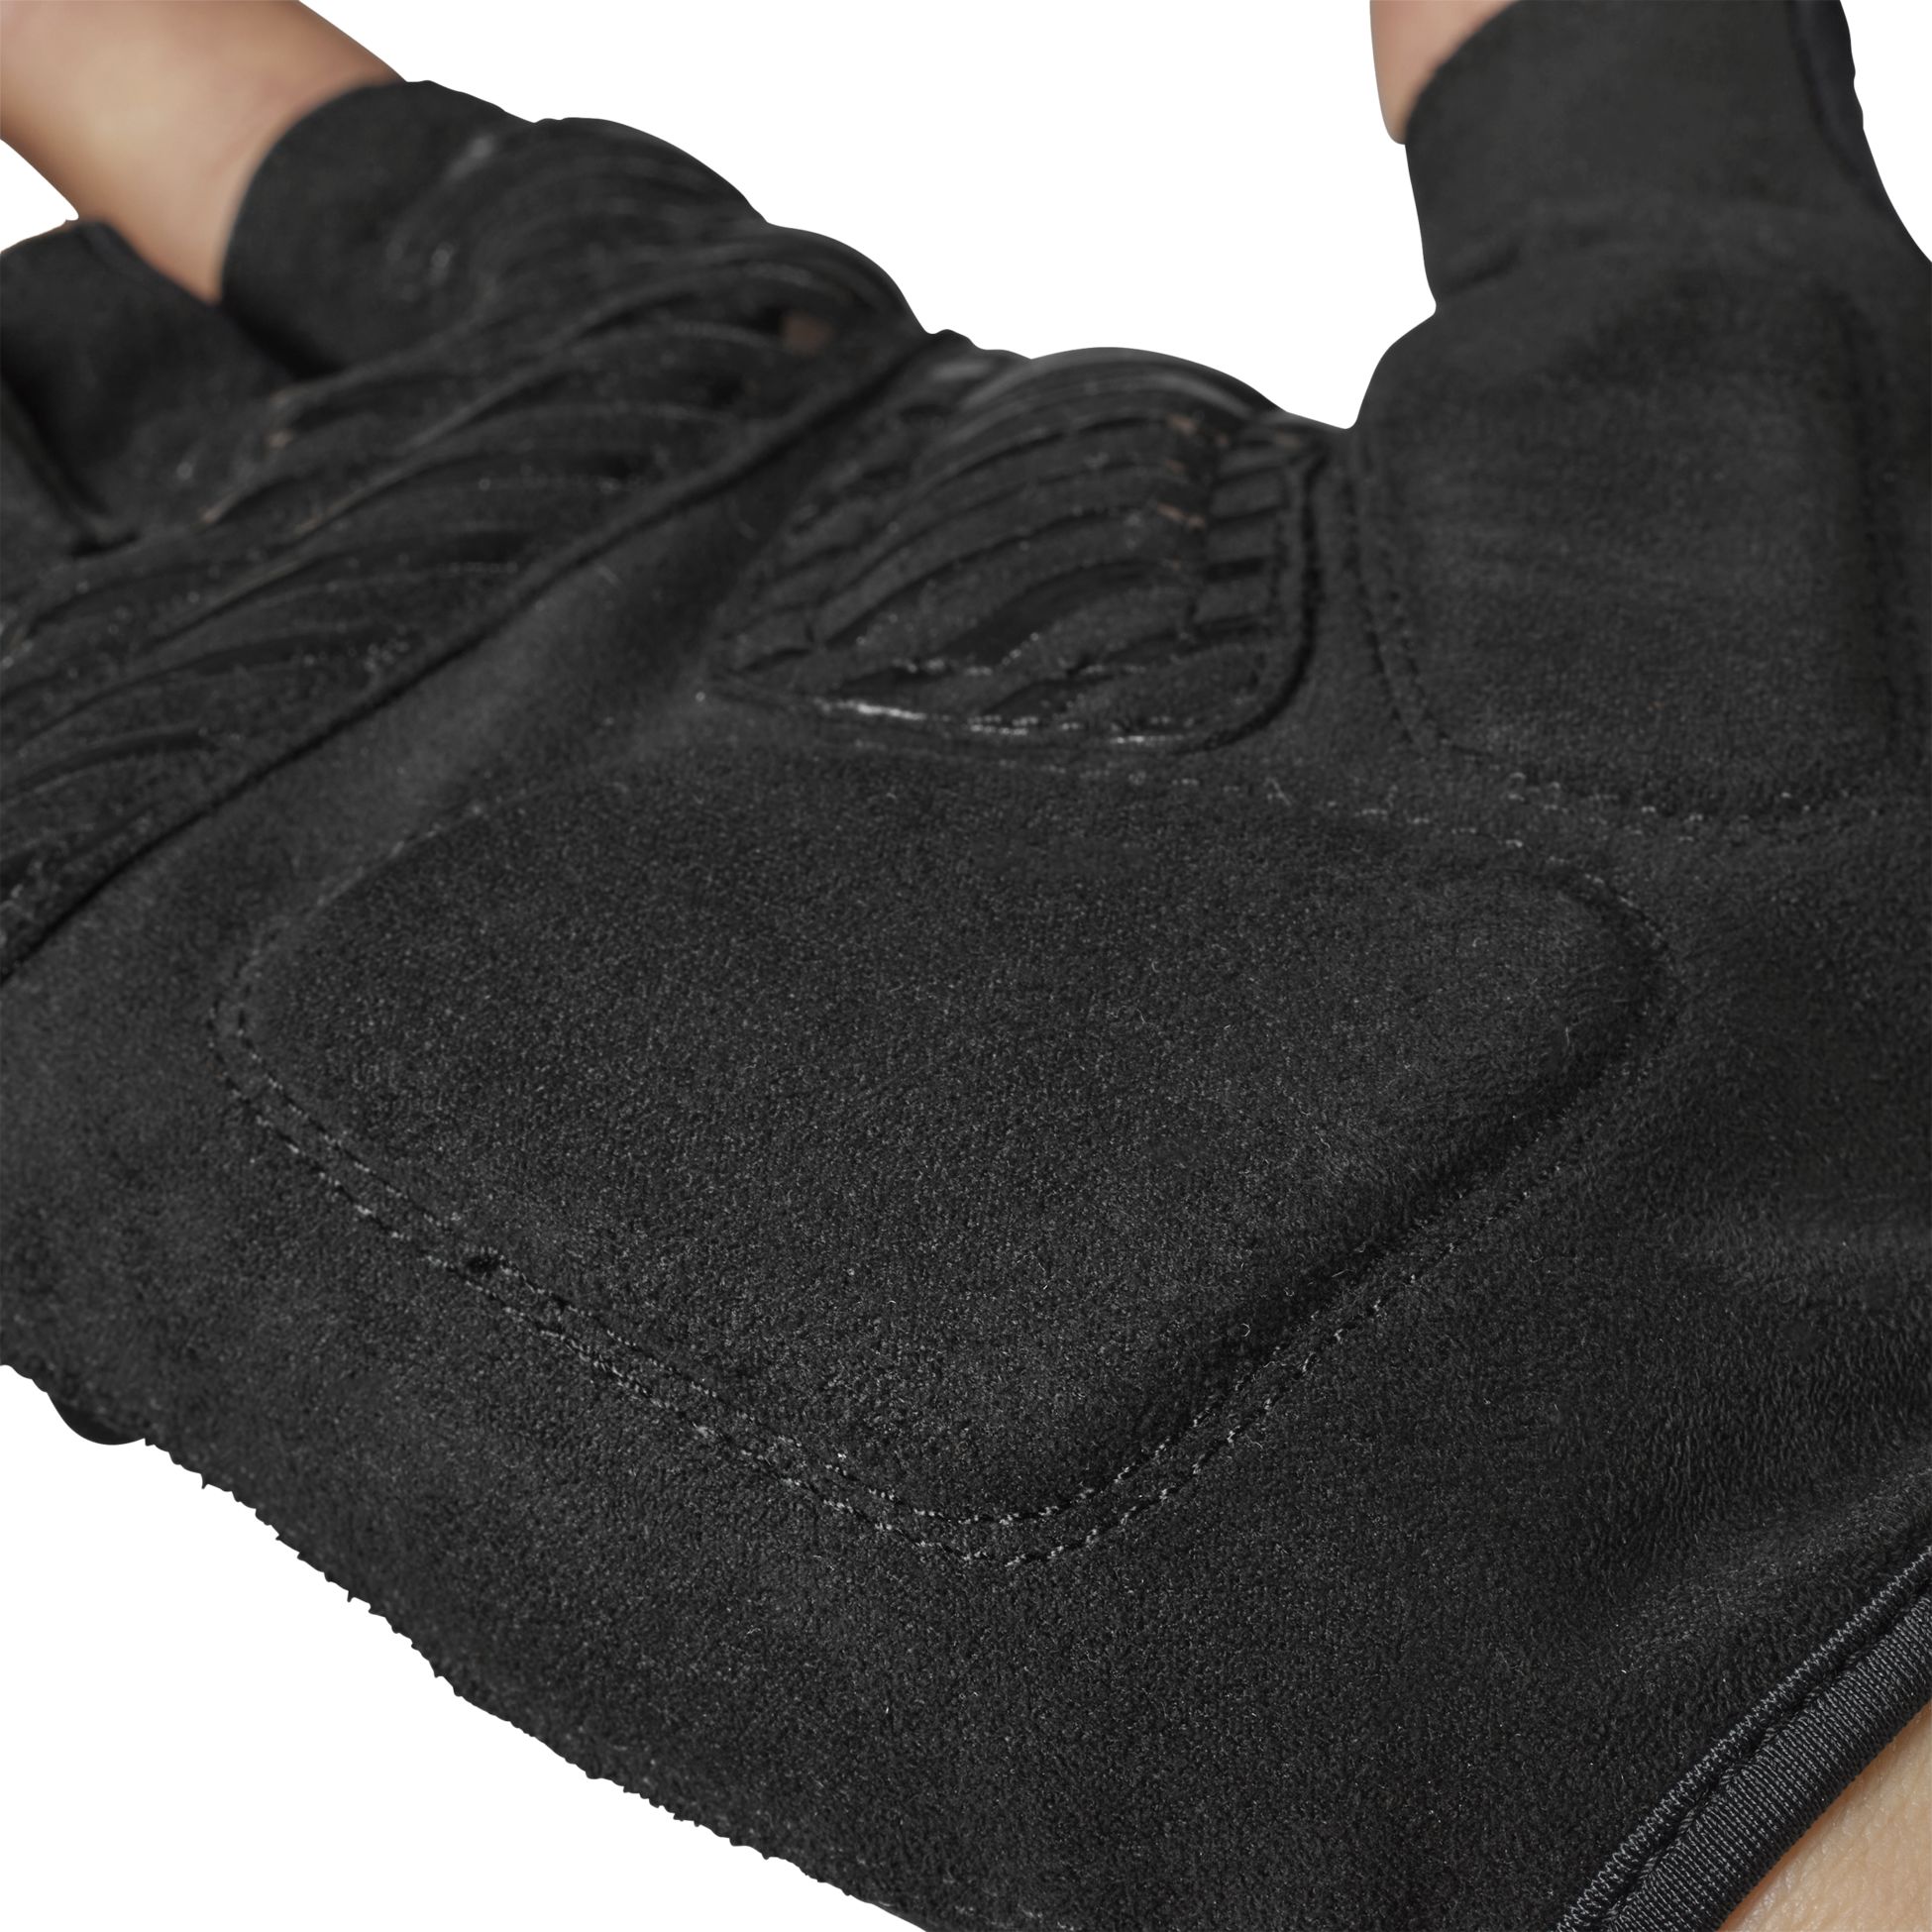 GRIPGRAB, ProRide RC Max Padded Short Finger Gloves